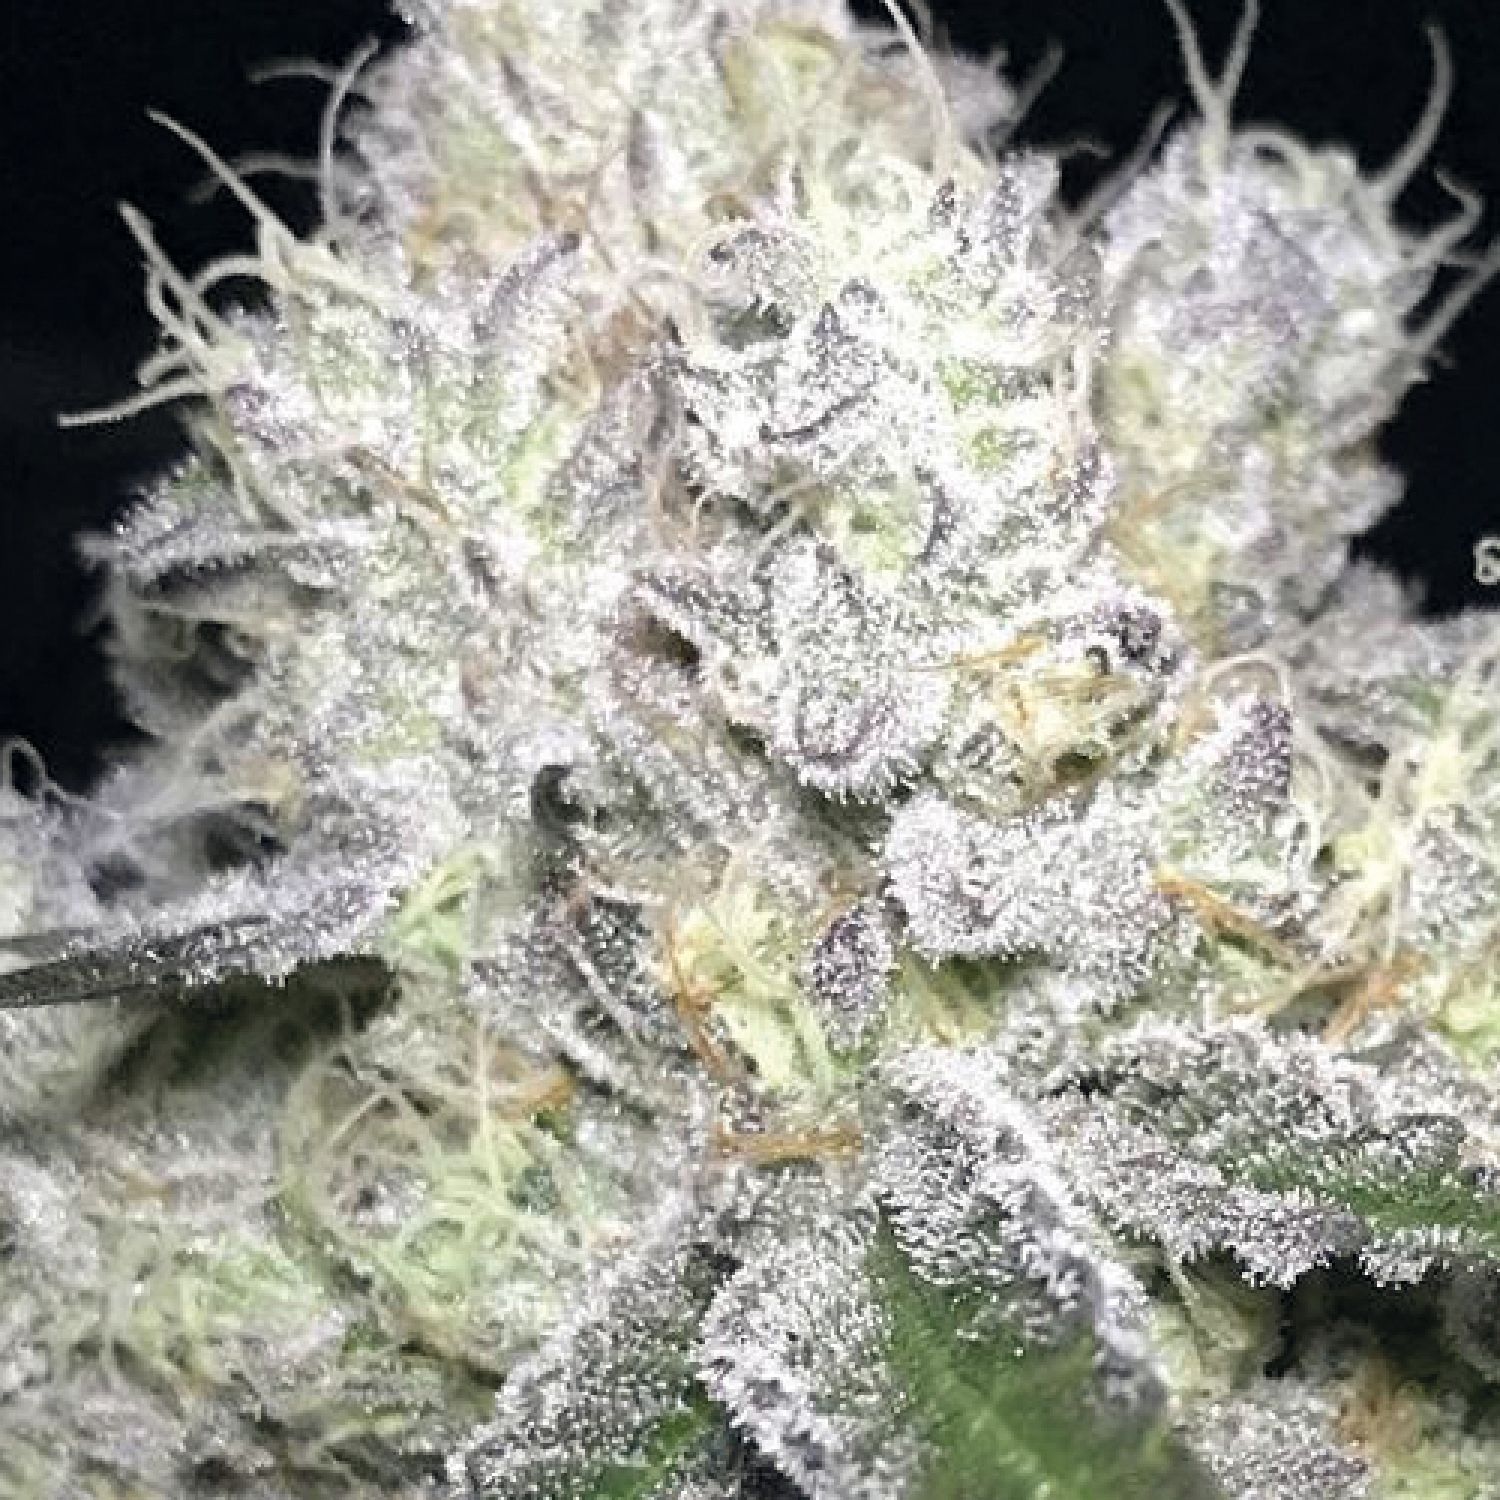 Heavy Hitter Strain Reviews: Girl Scout Cookies, Wedding Cake, and Gelato